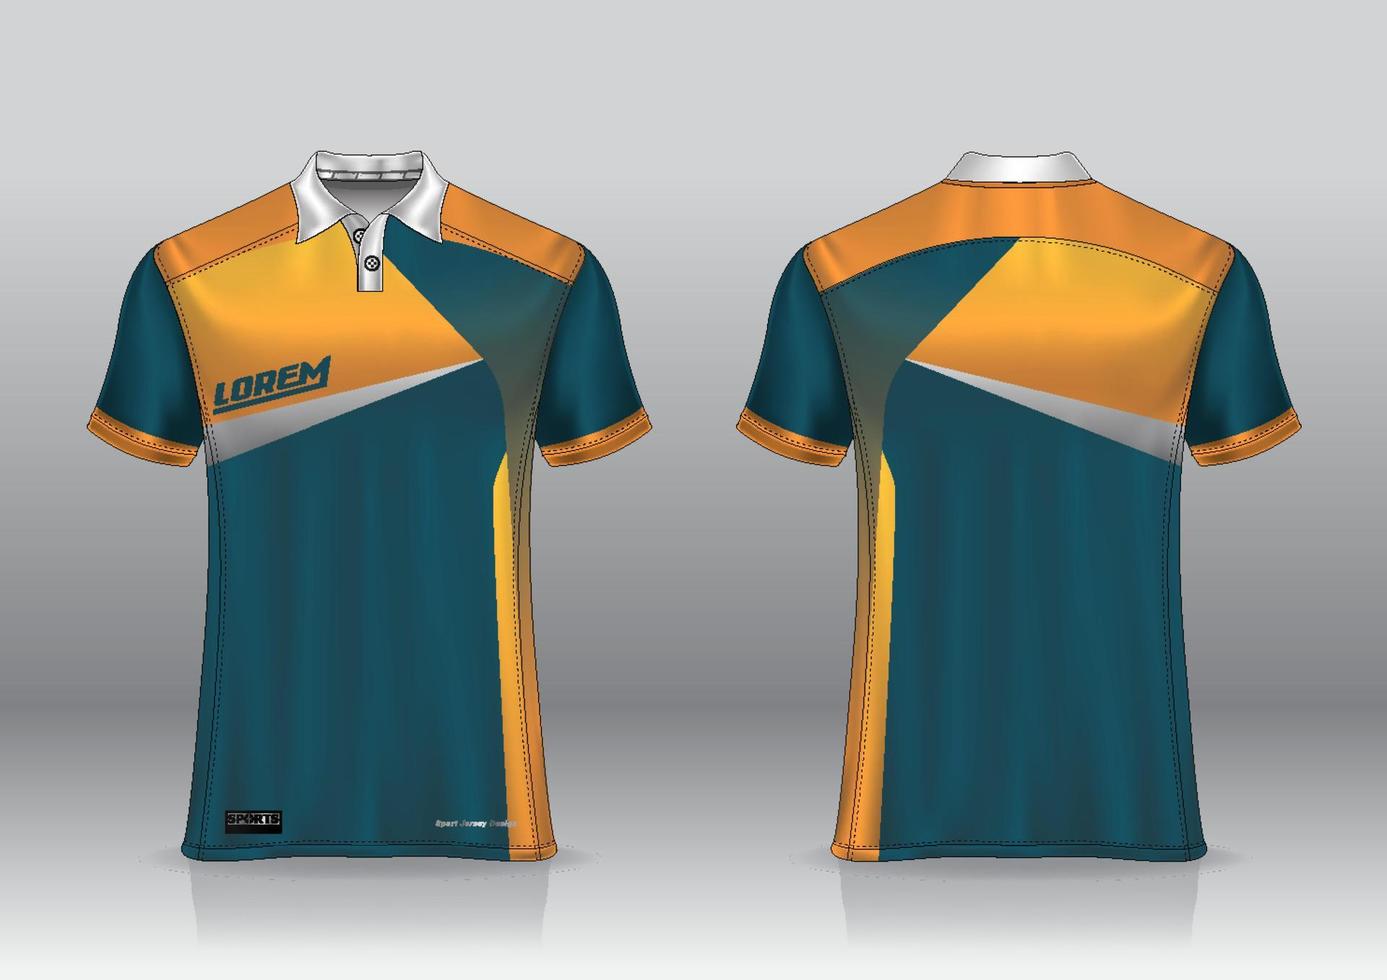 Polo shirt uniform design, can be used for badminton, golf in front ...